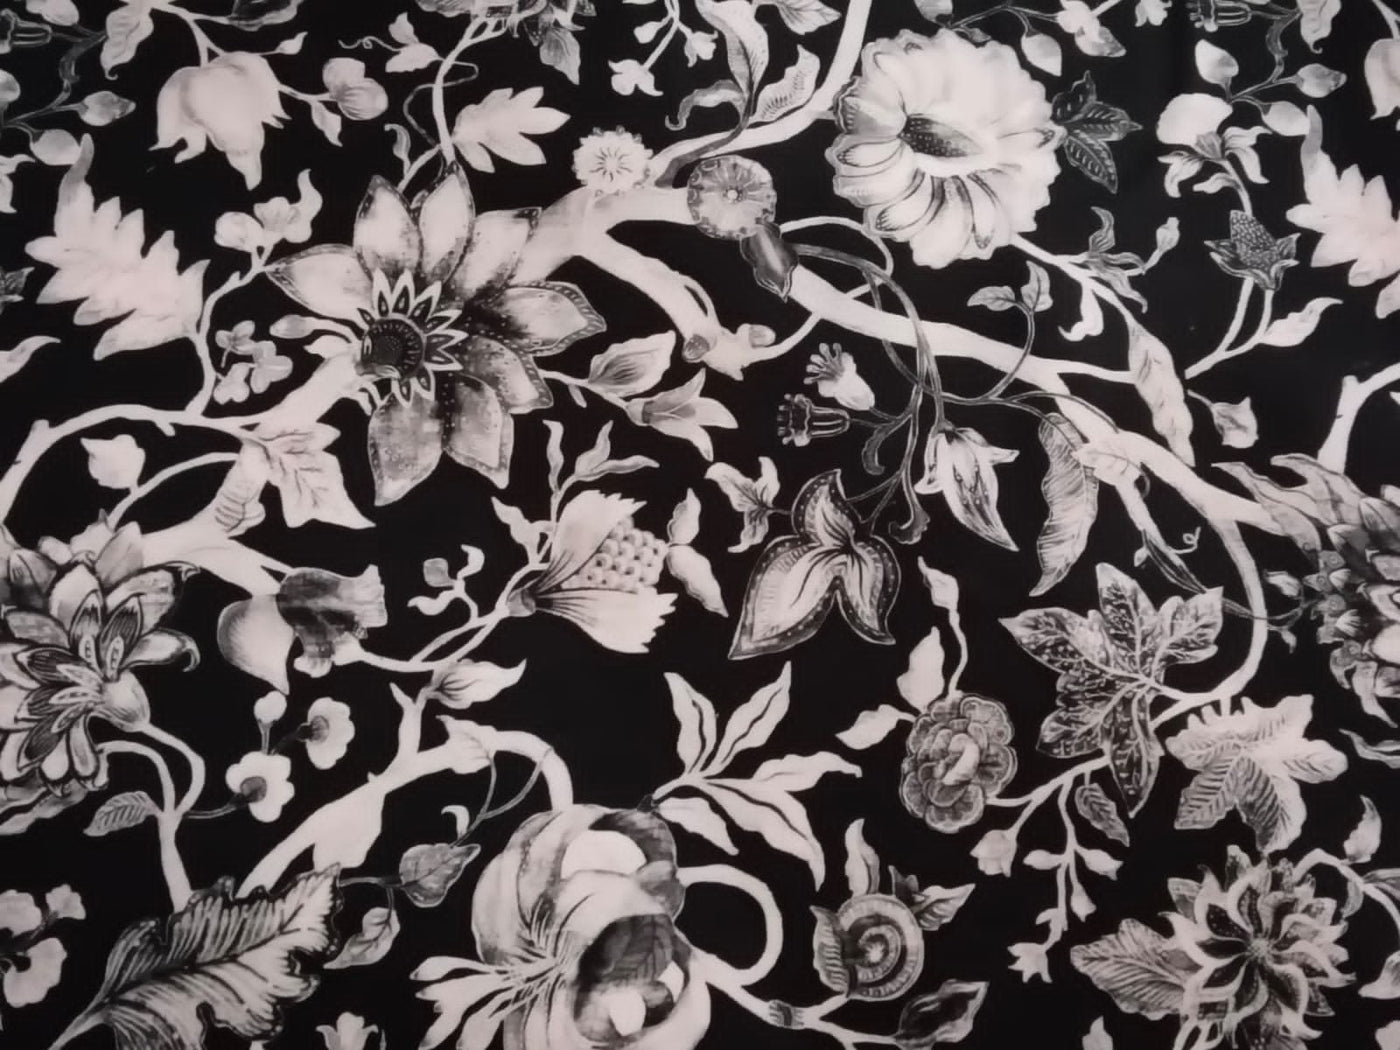 100% linen Floral digital print black and white fabric 44" wide [15297]